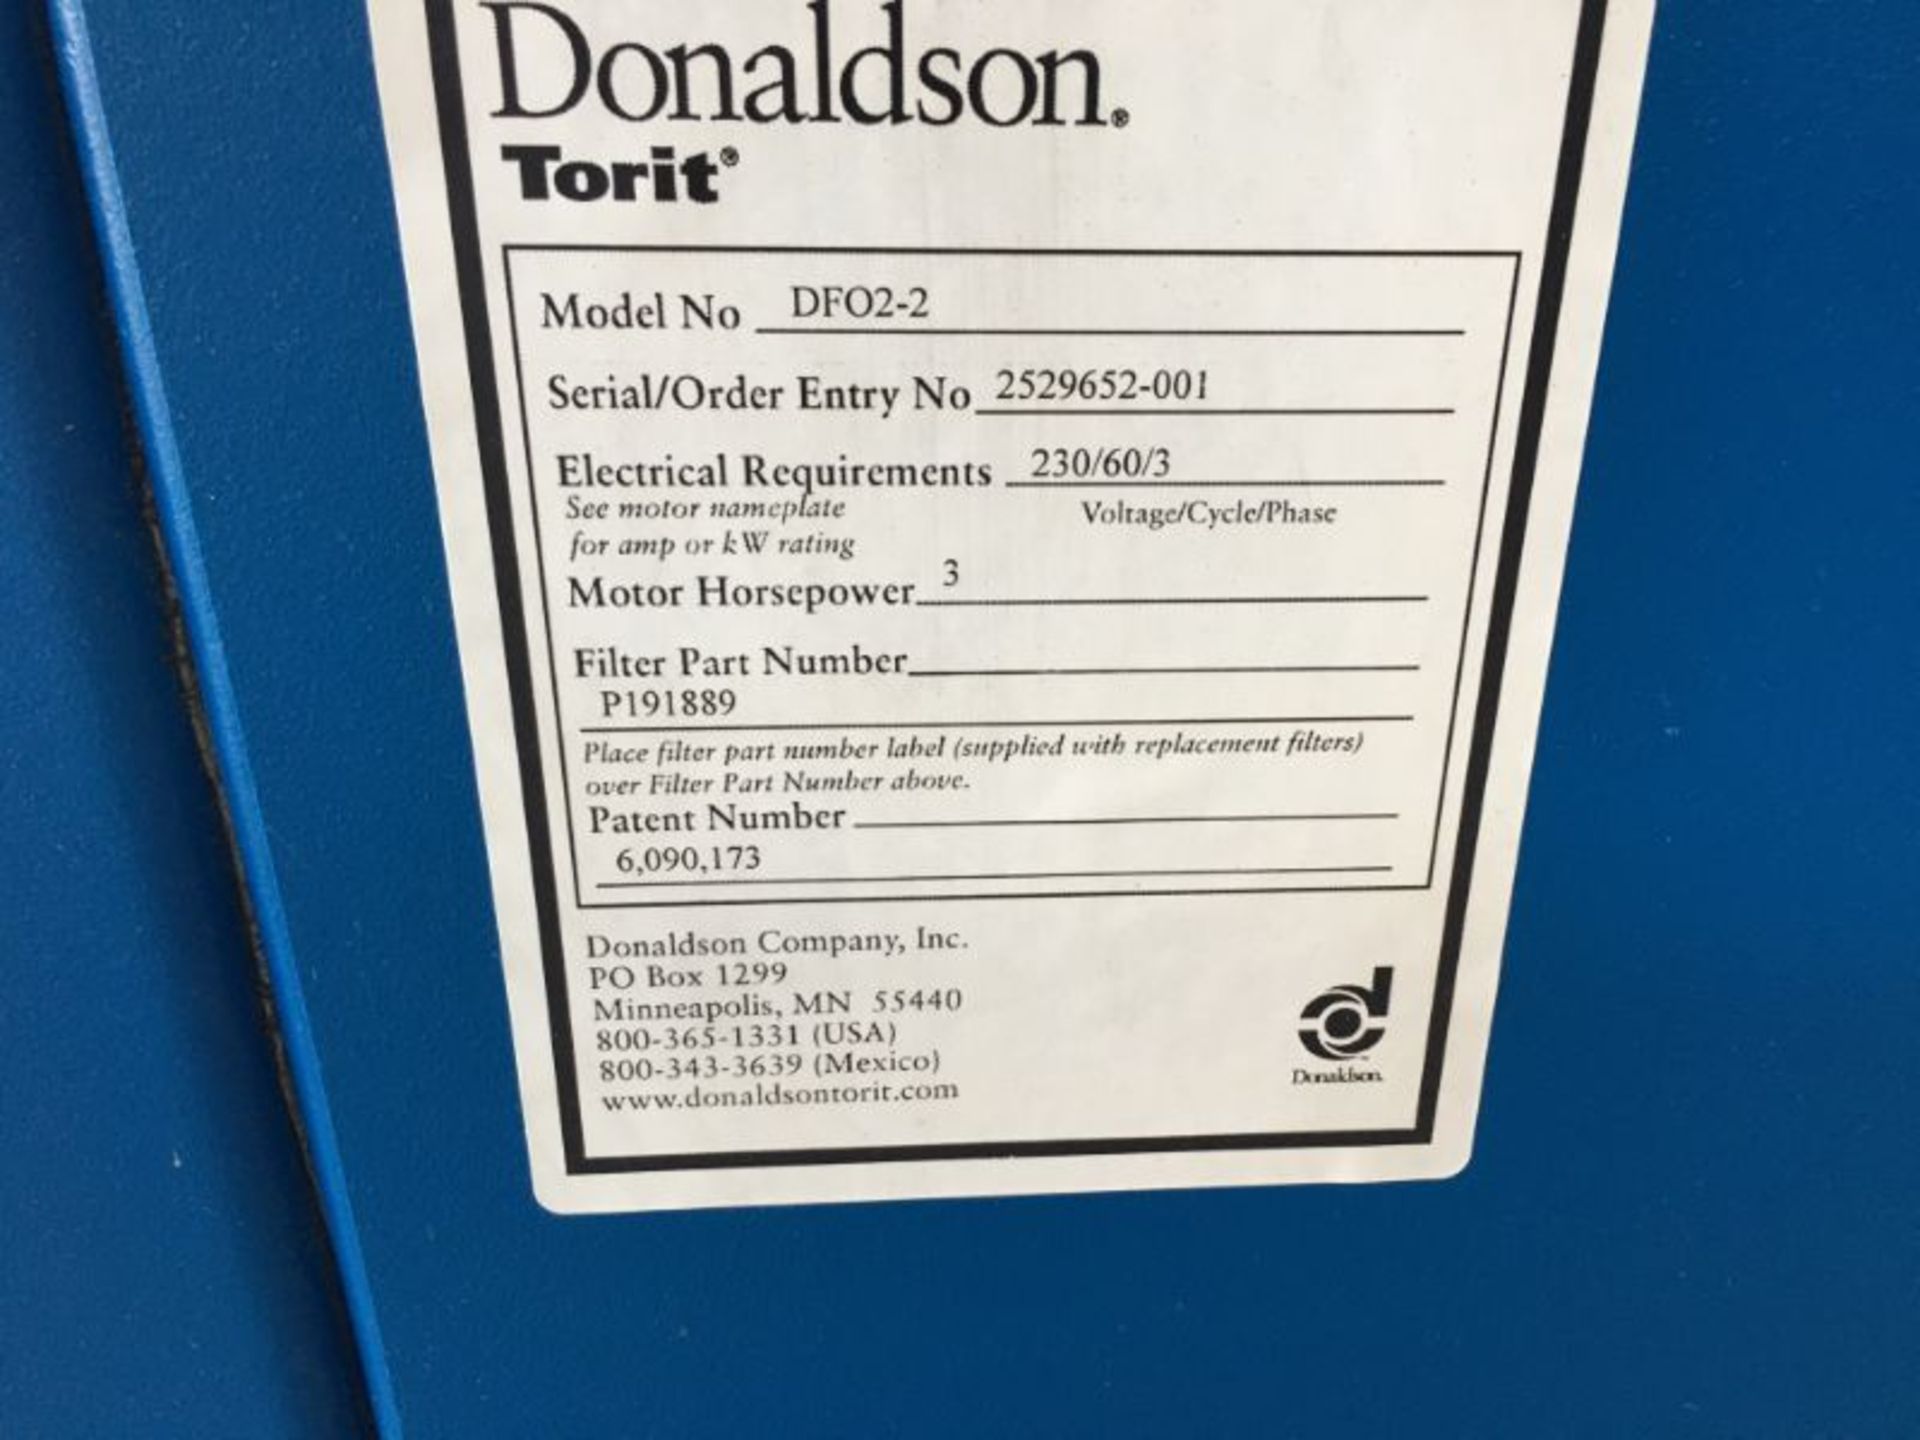 Donaldson DF02-2 Dust Collector, s/n 2529652-001 - Image 4 of 4